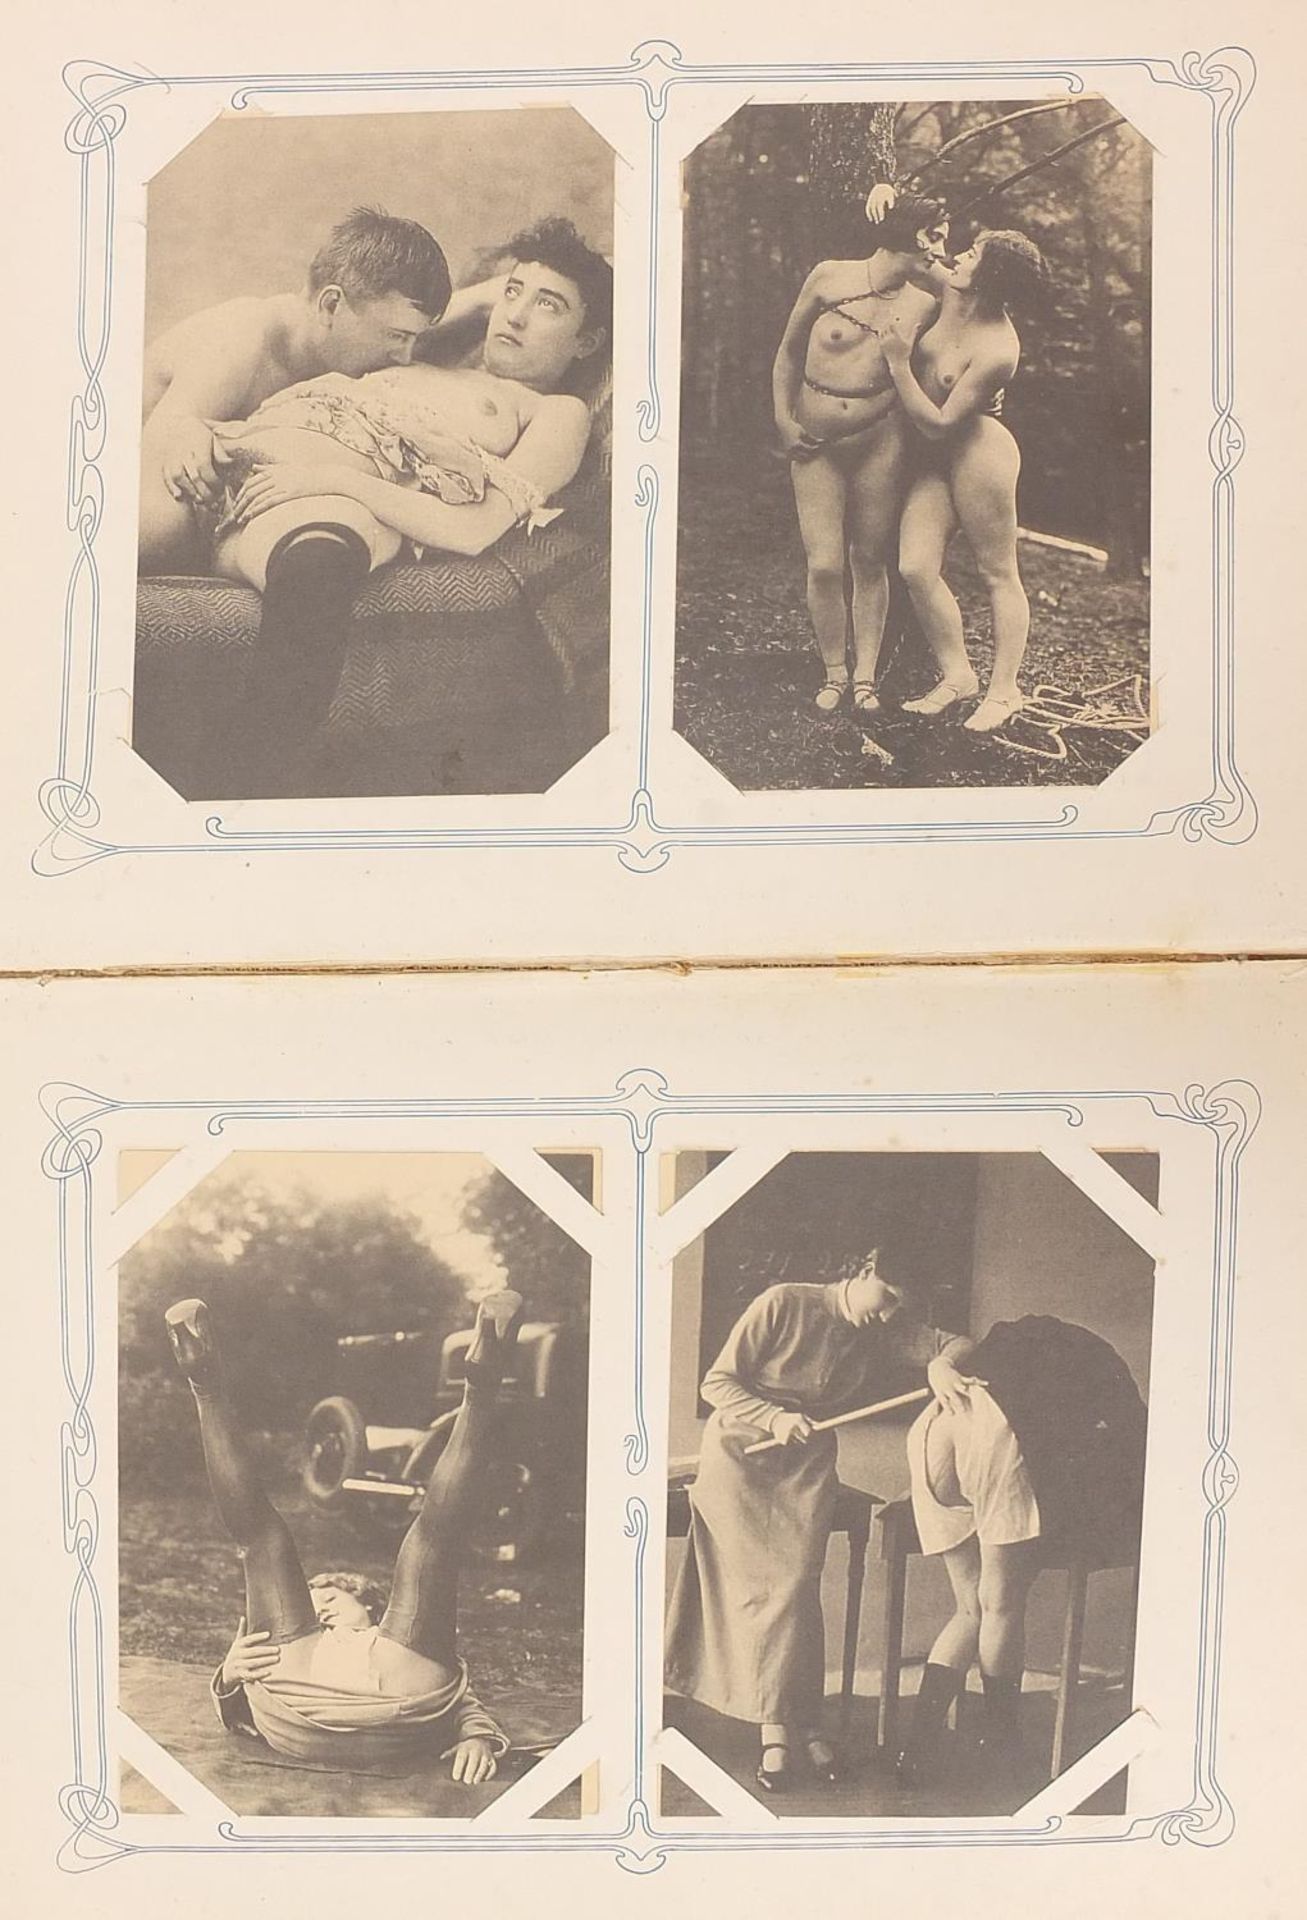 Collection of erotic and fetish postcards arranged in an album - Image 3 of 5